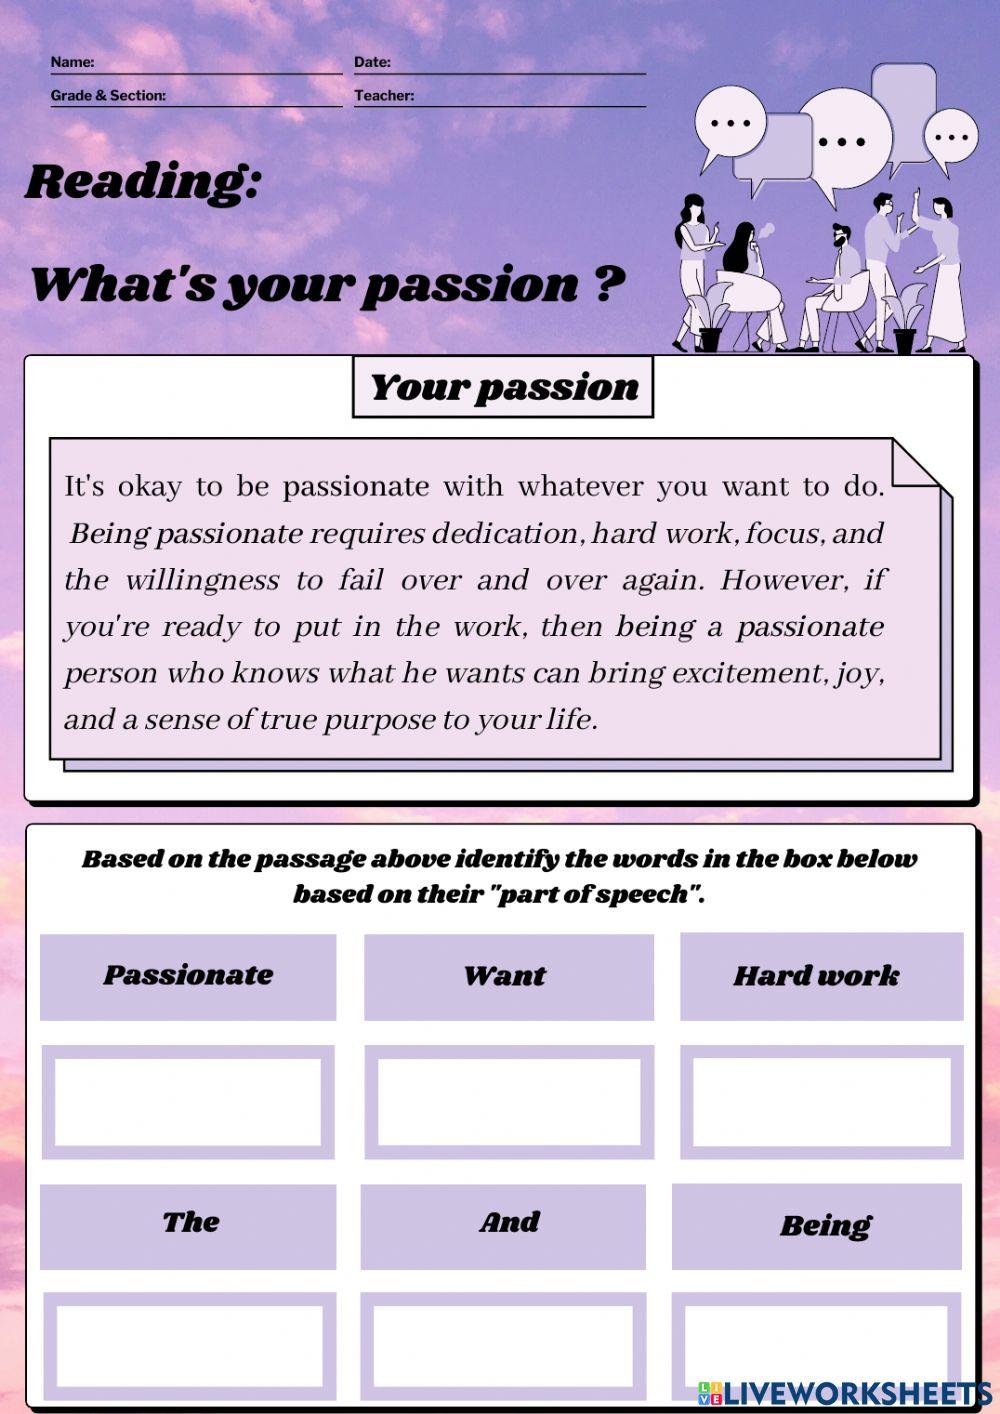 What's your passion ?